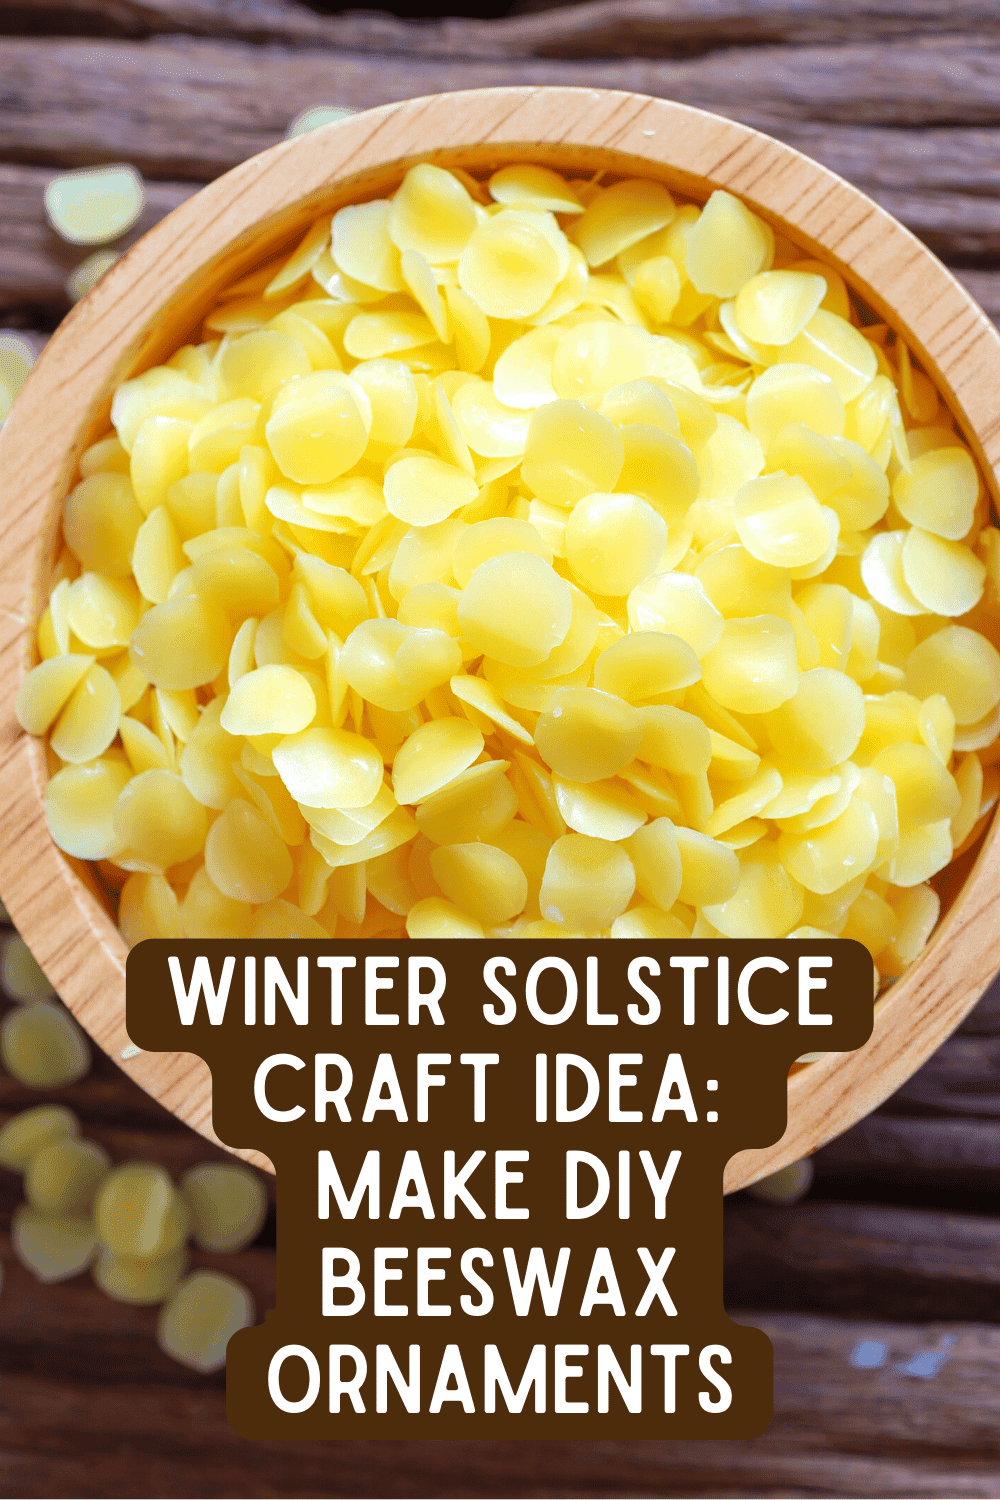 Winter Solstice Craft Projects Ideas - Make Beeswax Ornaments (beeswax pellets in a wood bowl)